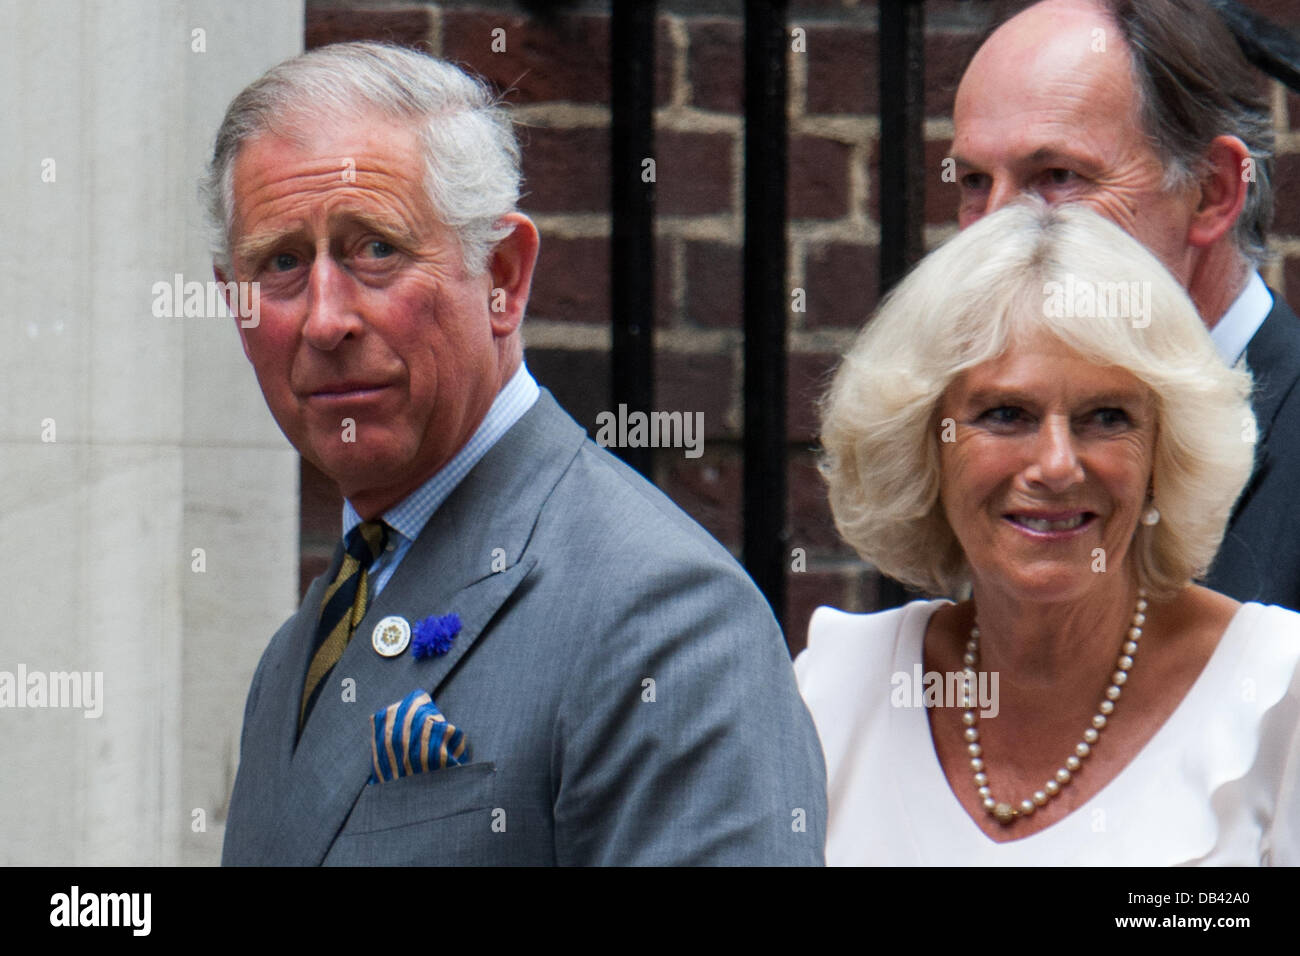 London, UK. 23rd July 2013. HRH Prince Charles & the Duchess of Cornwall arrive at St. Mary's Hospital to visit  his grandson for the first time as he visited the Duke and Duchess of Cambridge in hospital. 23rd July 2013, London, UK Credit:  martyn wheatley/Alamy Live News Stock Photo